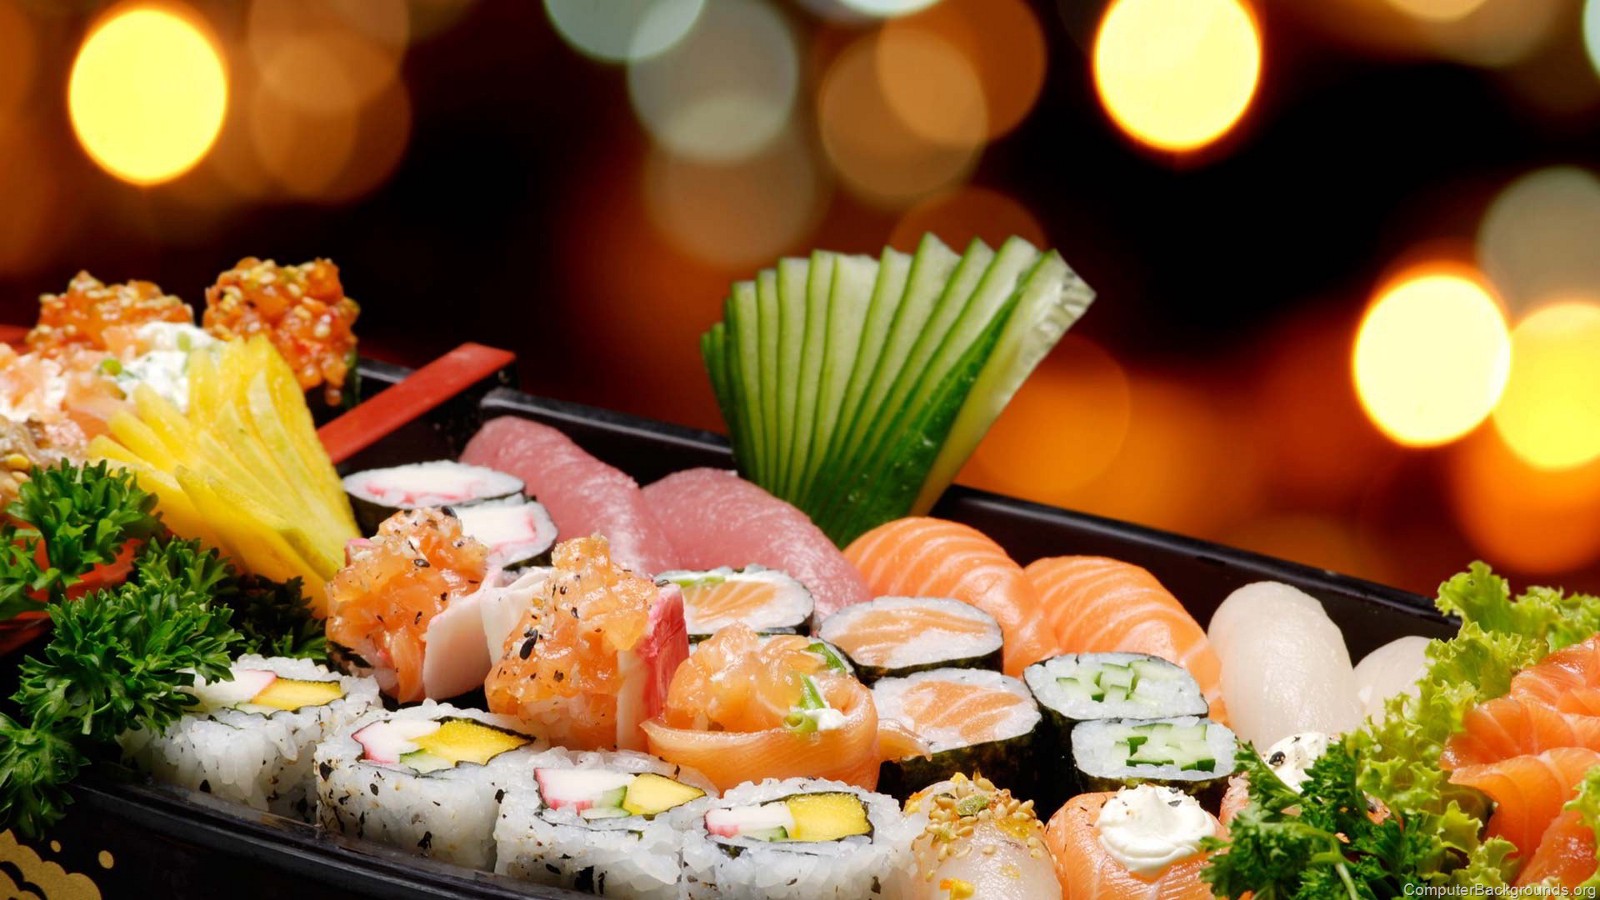 🥘 I Bet We Can Guess Your Age Based on the Food You’d Rather Eat Sushi